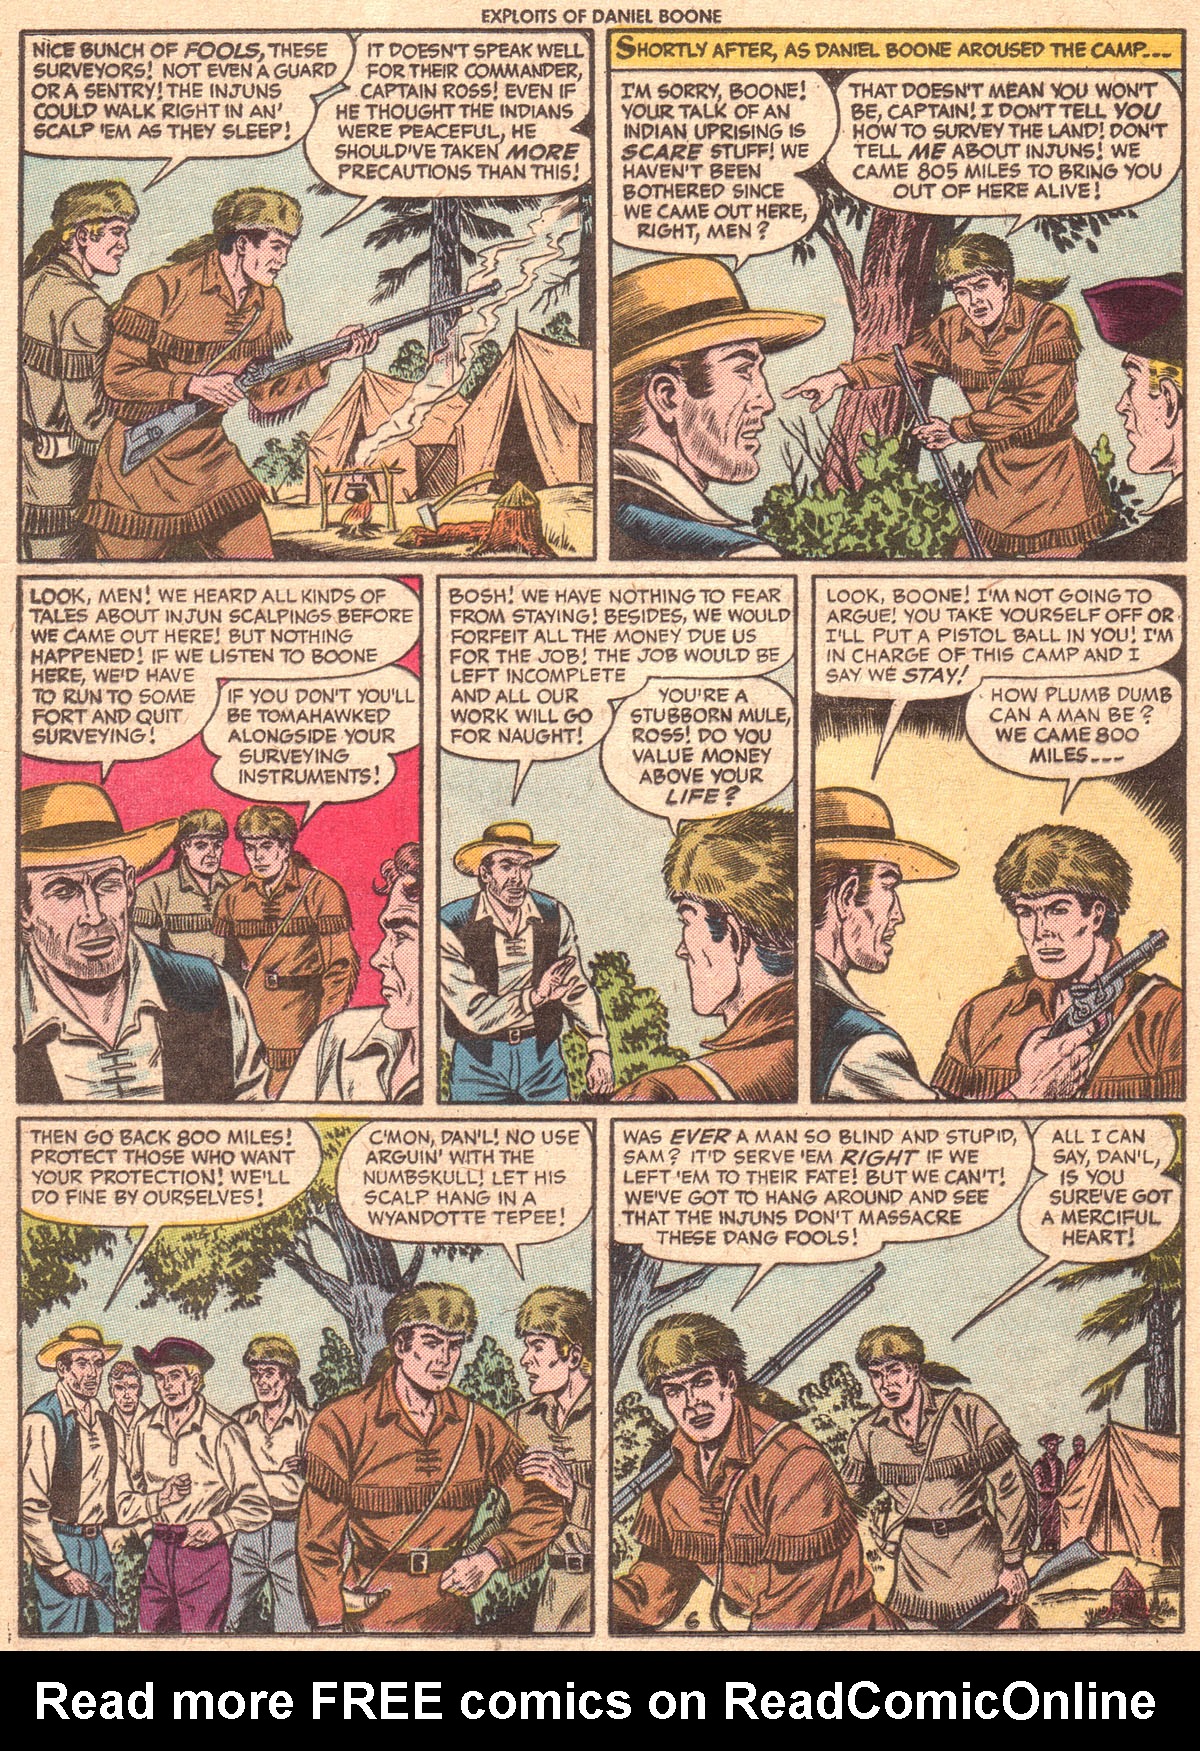 Read online Exploits of Daniel Boone comic -  Issue #5 - 24